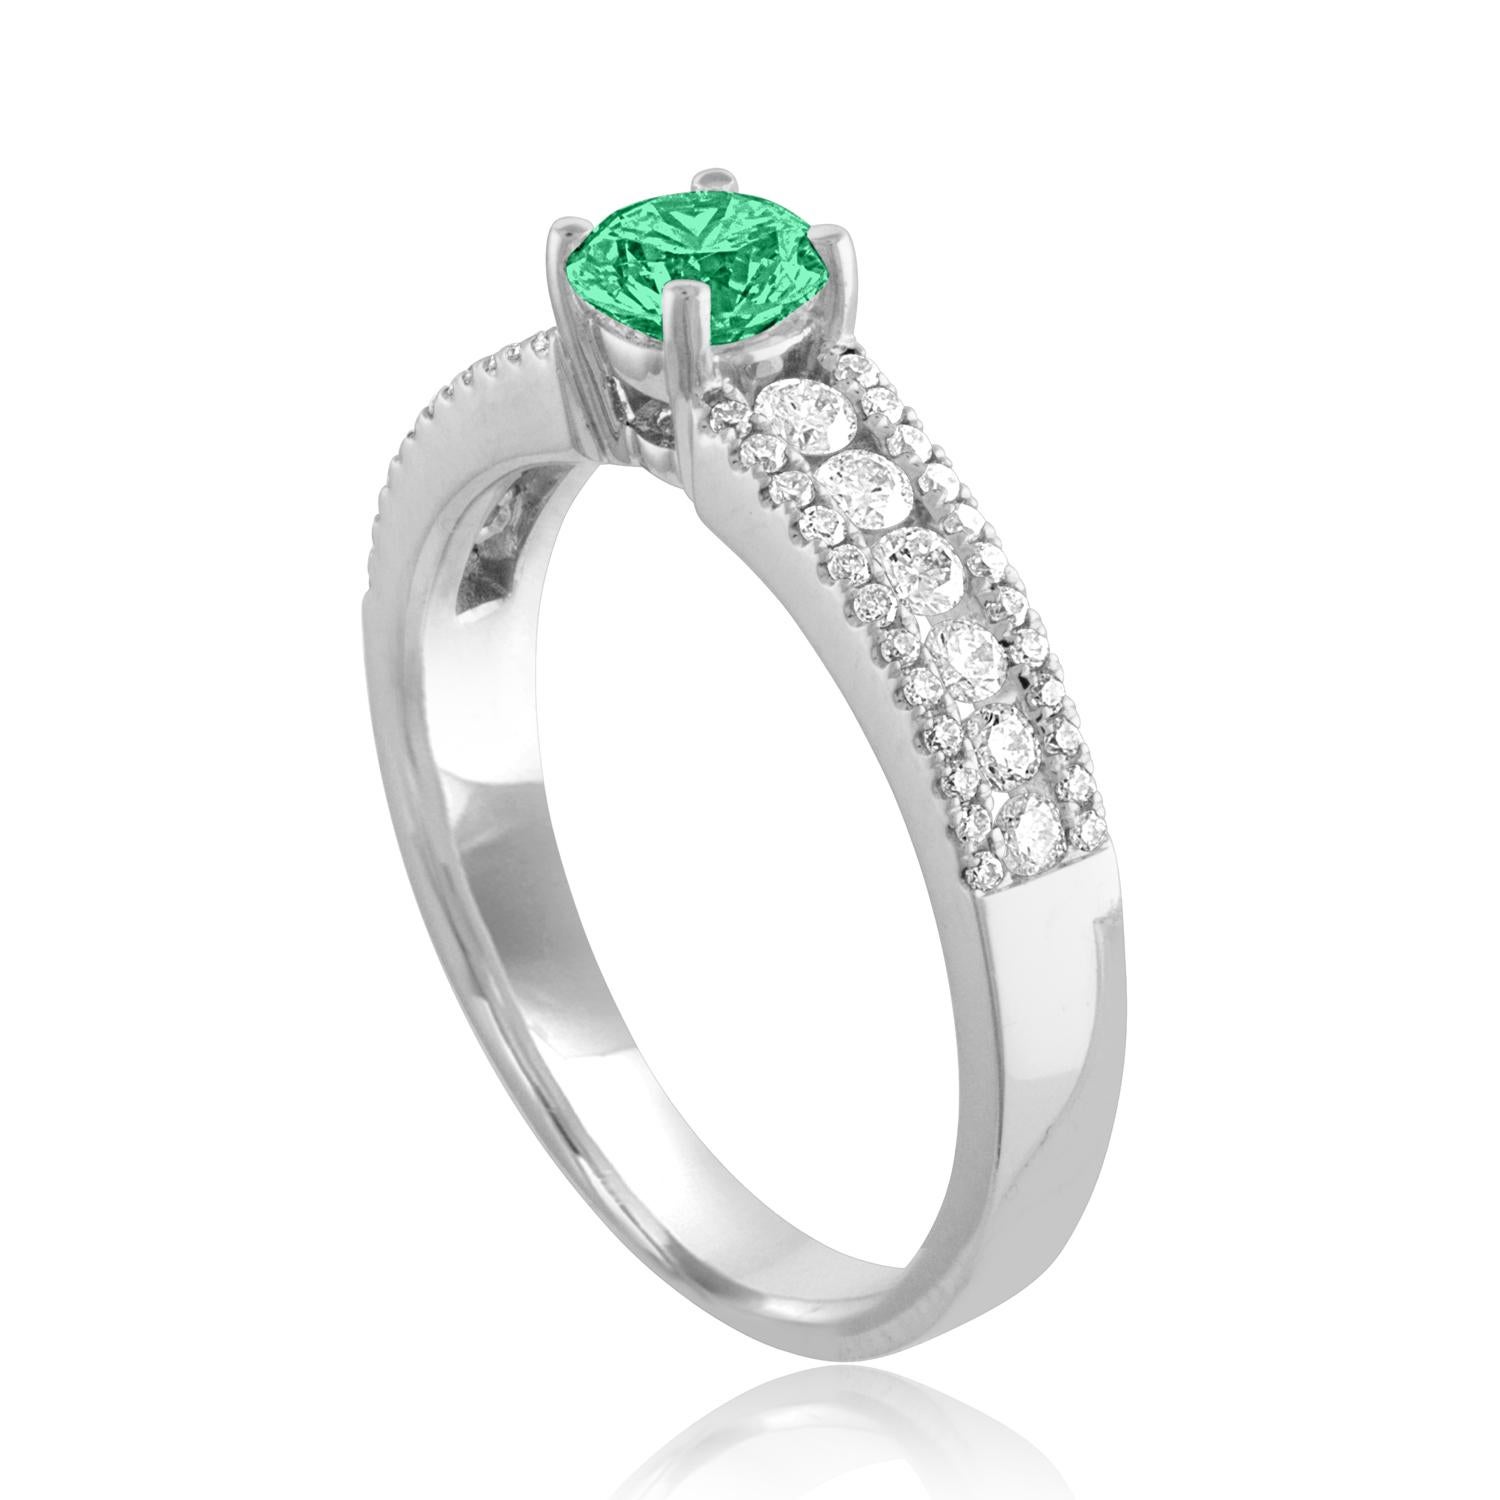 Beautiful Diamond & Emerald Ring
The ring is 18K White Gold.
There are 0.51 Carats in Diamonds F/G VS/SI
The Center is Round 0.44 Carat Emerald.
The Emerald is AGL certified.
The ring is a size 6.50, sizable.
The ring weighs 3.8 grams.